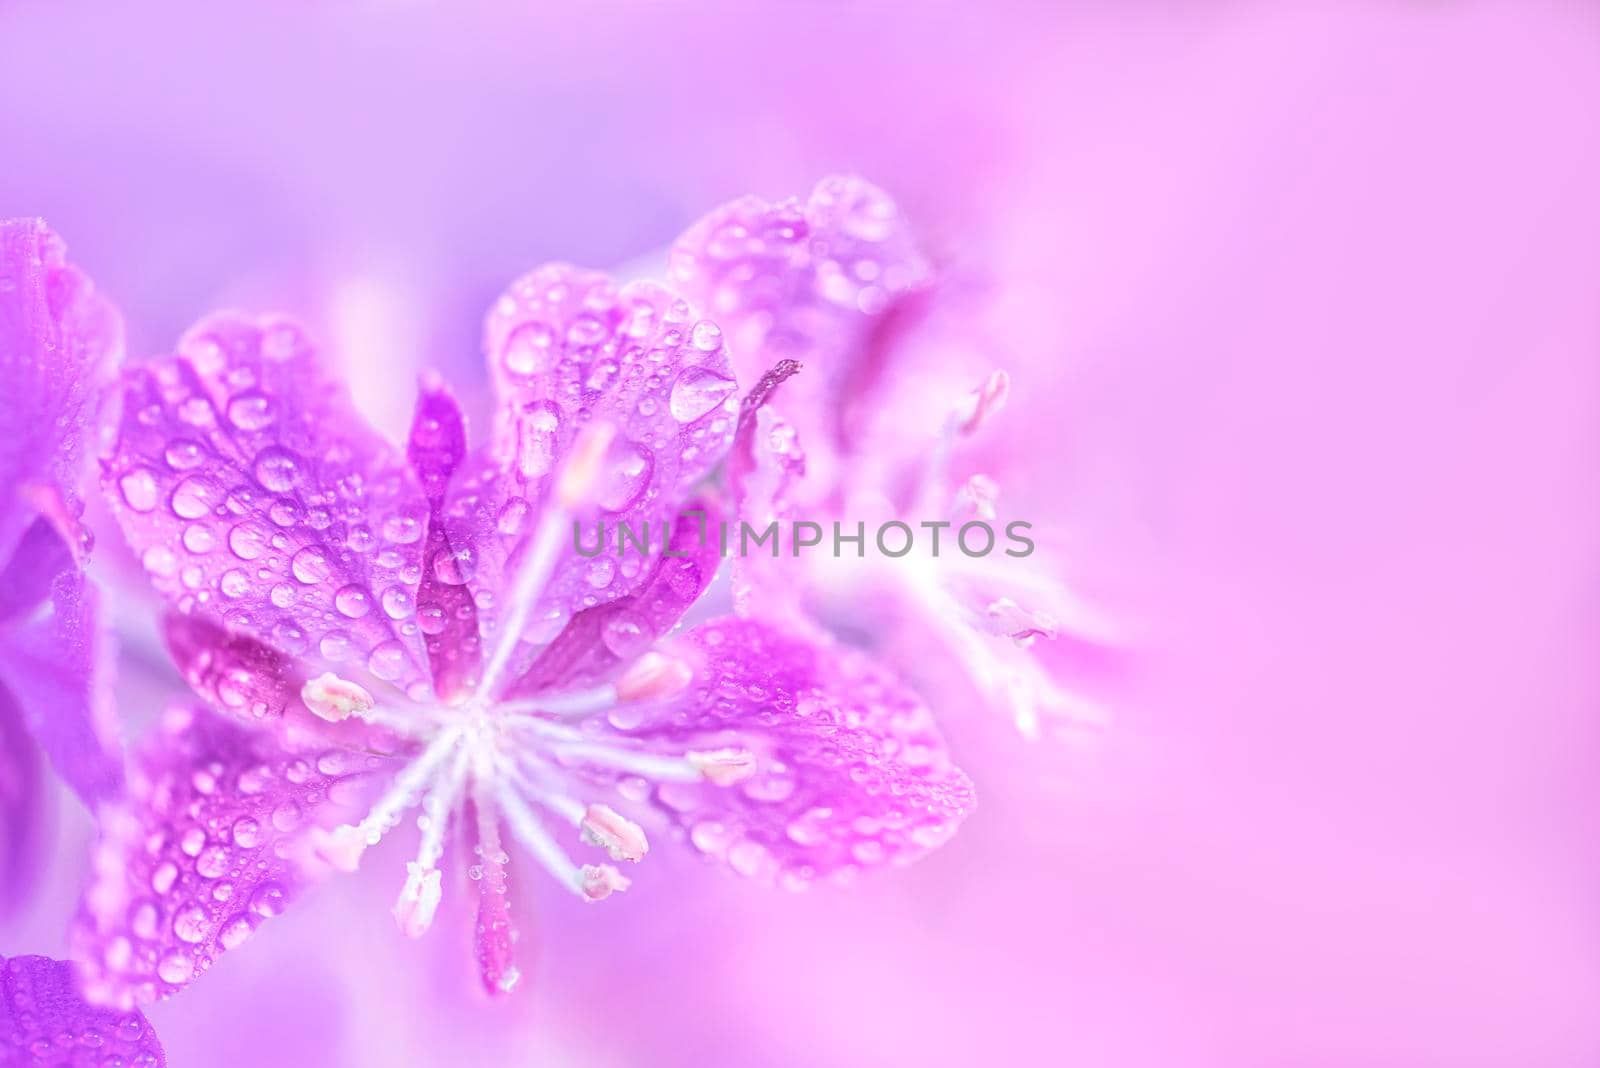 Purple fireweed flowers with waterdrops close up on an blur pink background